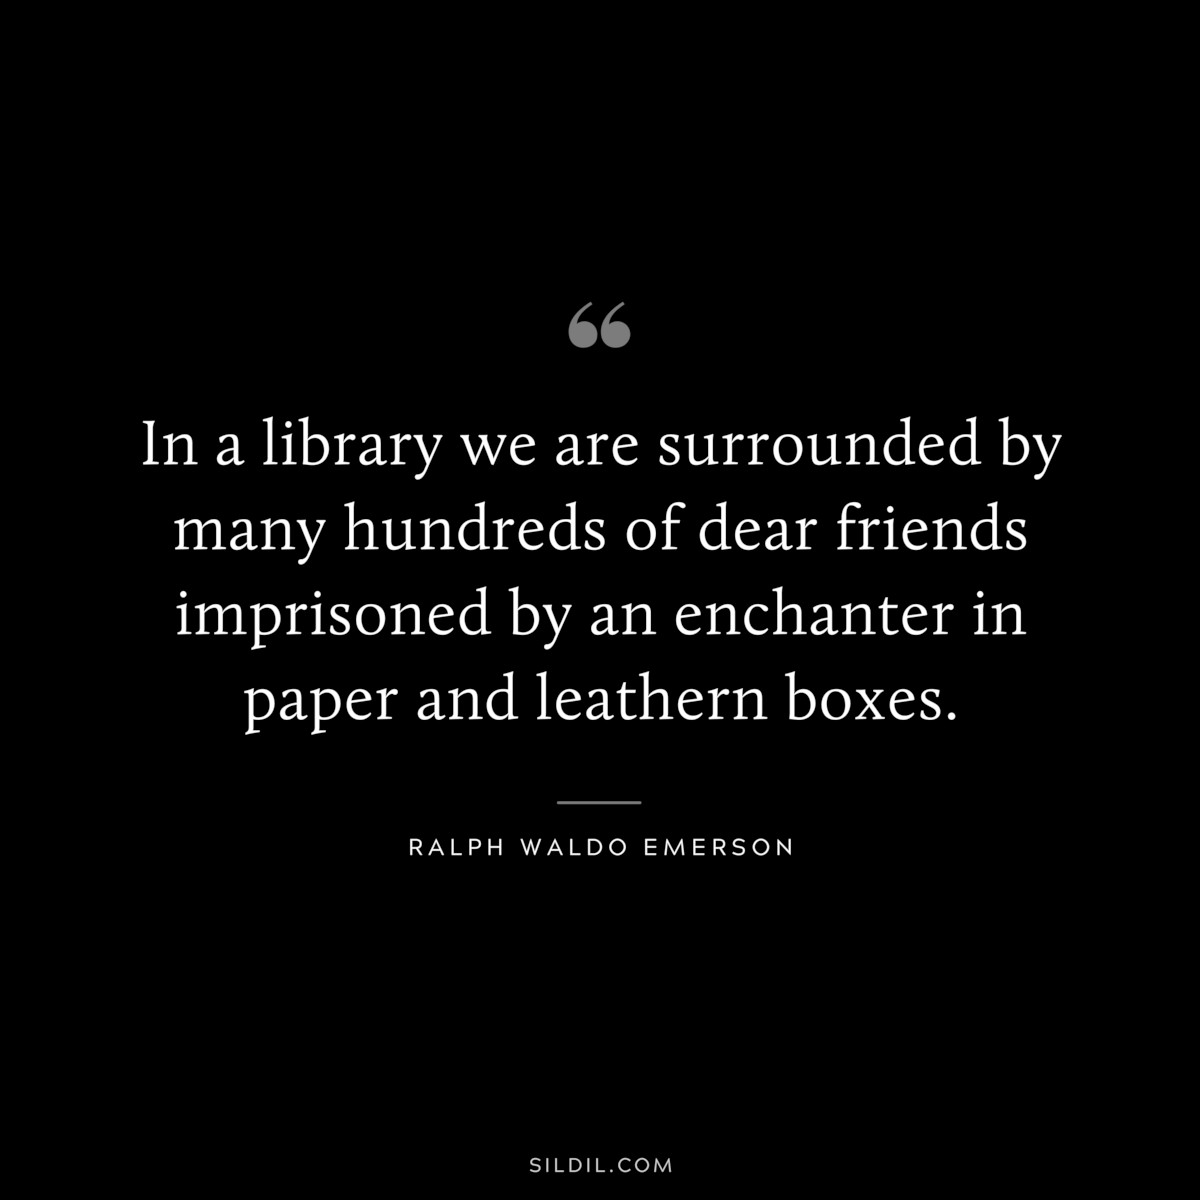 In a library we are surrounded by many hundreds of dear friends imprisoned by an enchanter in paper and leathern boxes. — Ralph Waldo Emerson